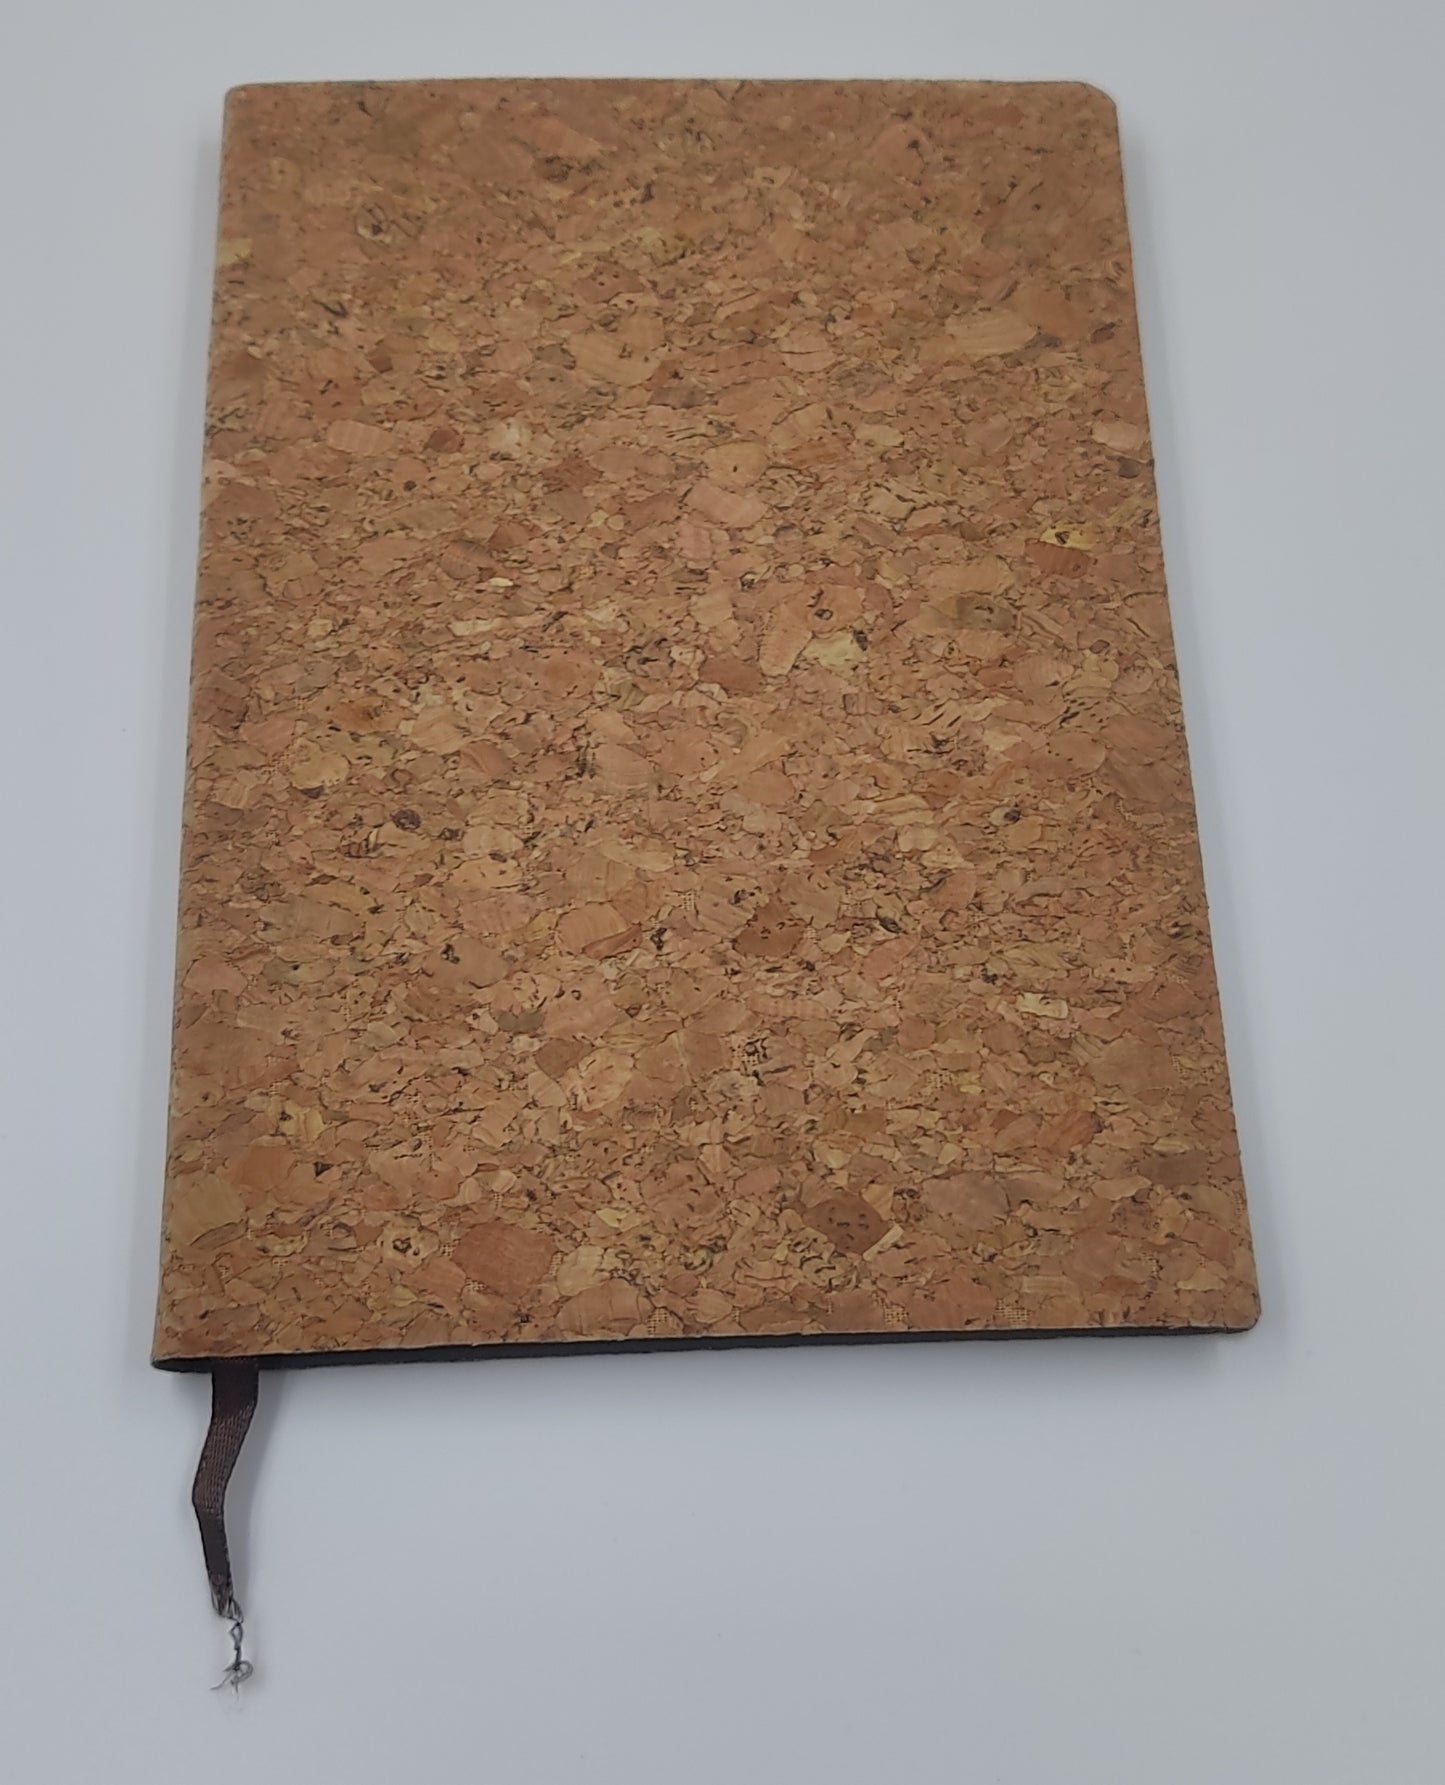 Cork Eco friendly A5 notebook with memorandum & Bookmark ribbon| 80 gsm sheets | 160 undated pages